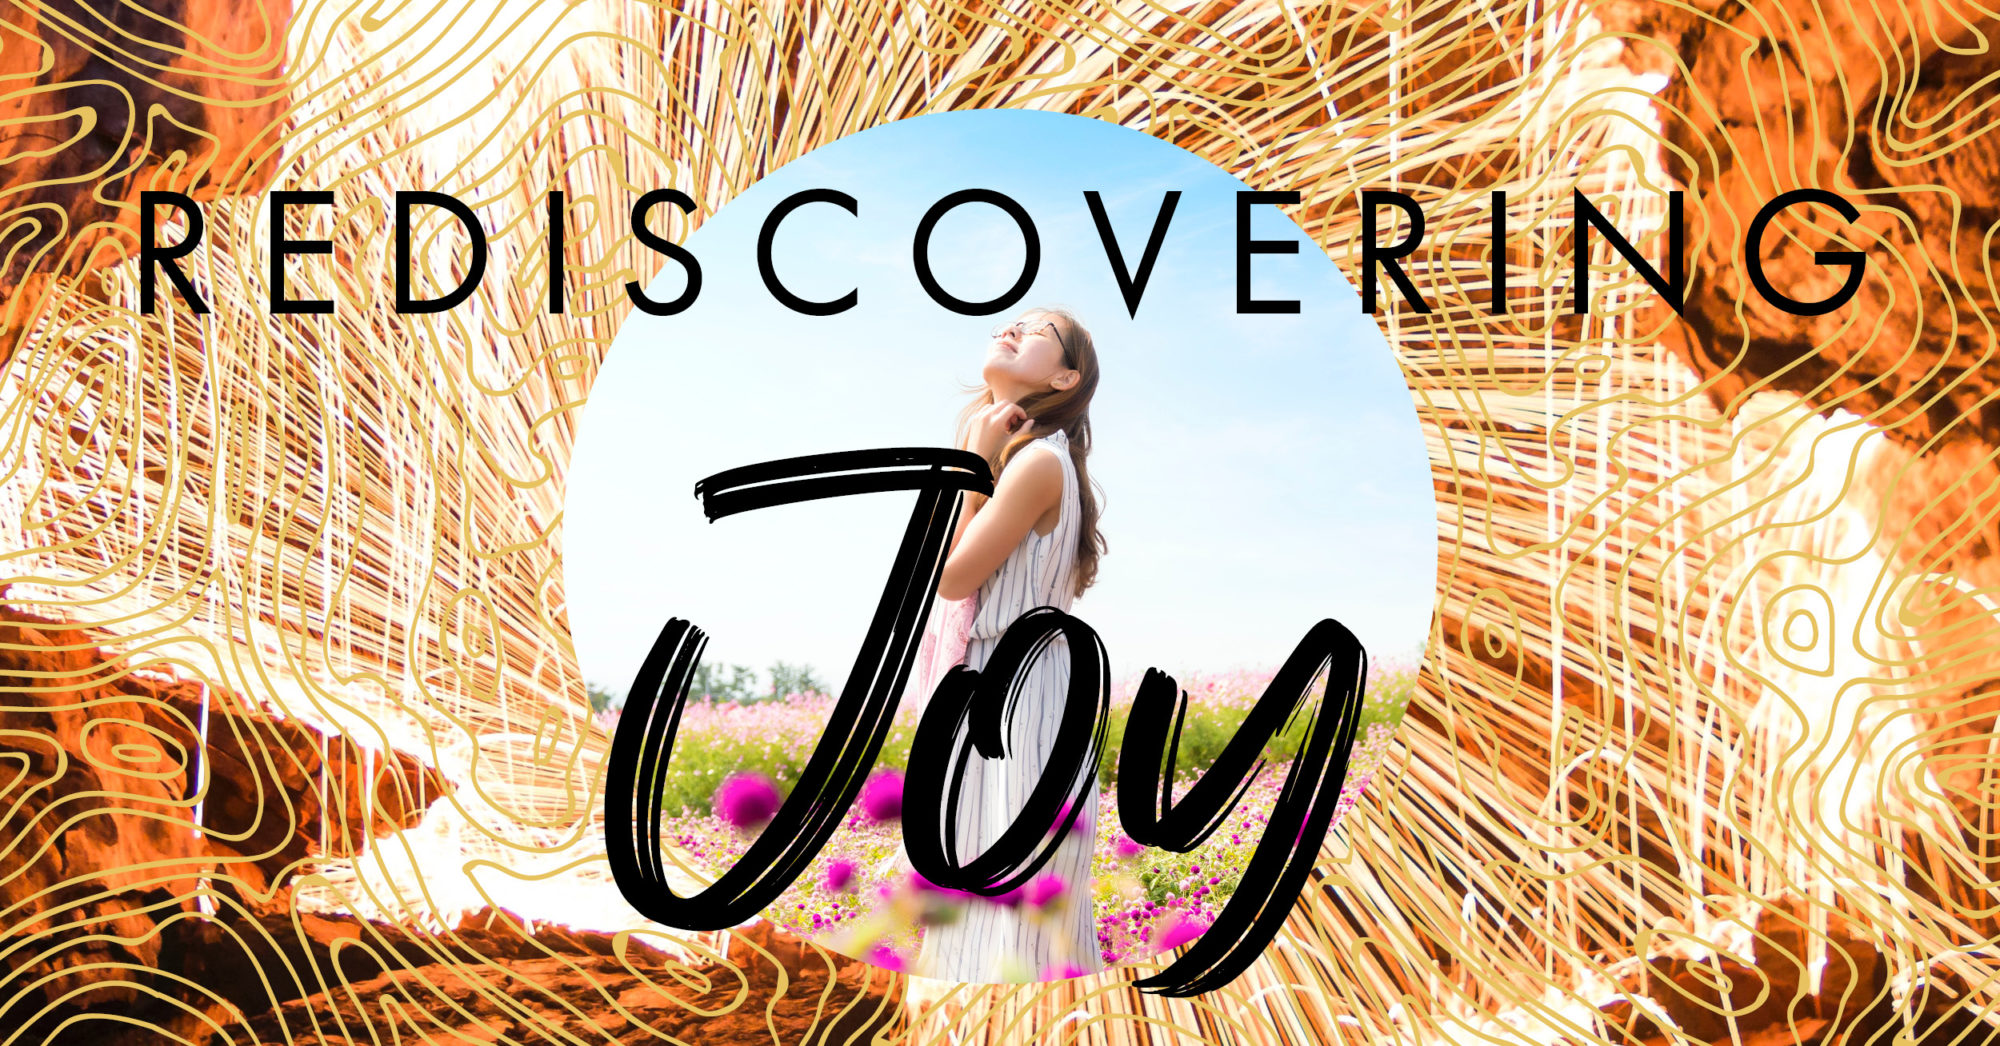 A person standing in a field of flowers surrounded by a wheat circular overlay, with the text, "Rediscovering Joy."